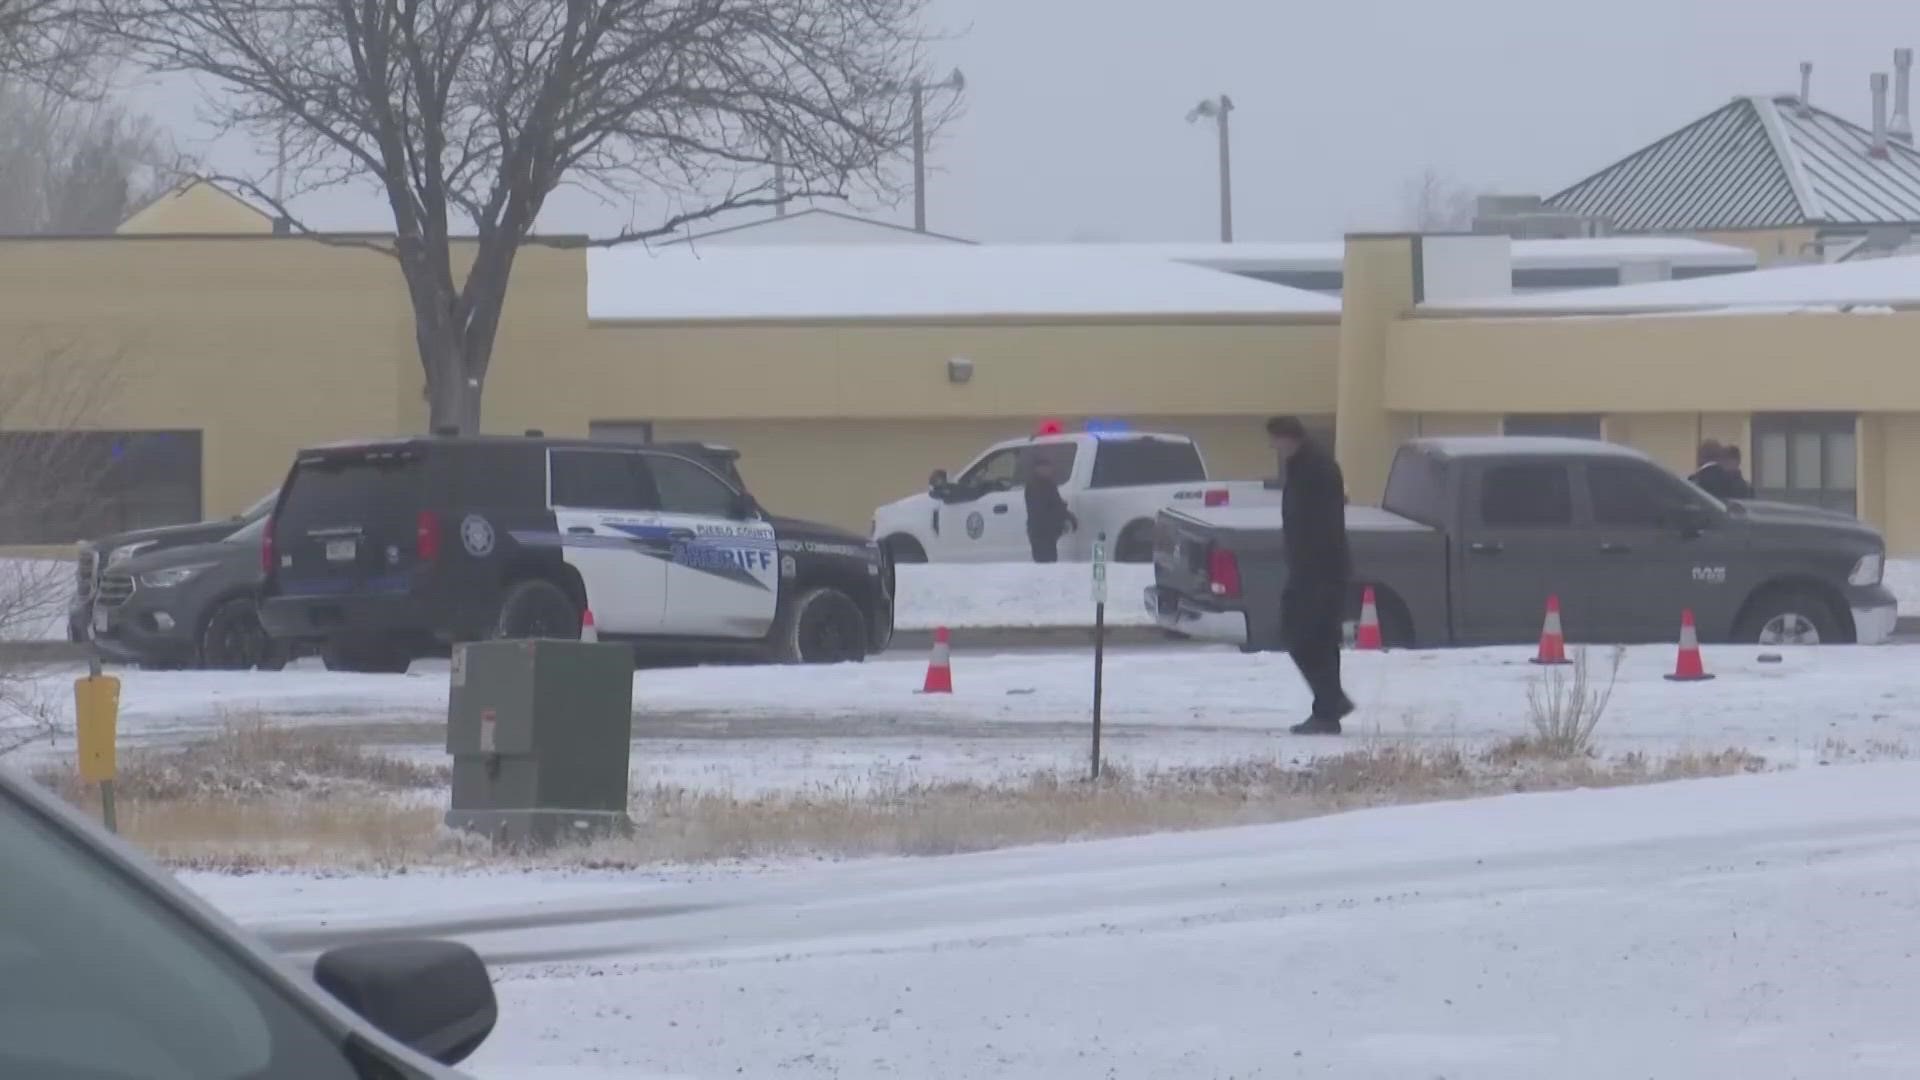 A family plans to file a federal lawsuit against the Pueblo County Sheriff’s Office after deputies shot and killed a man in a middle school pickup line last year.